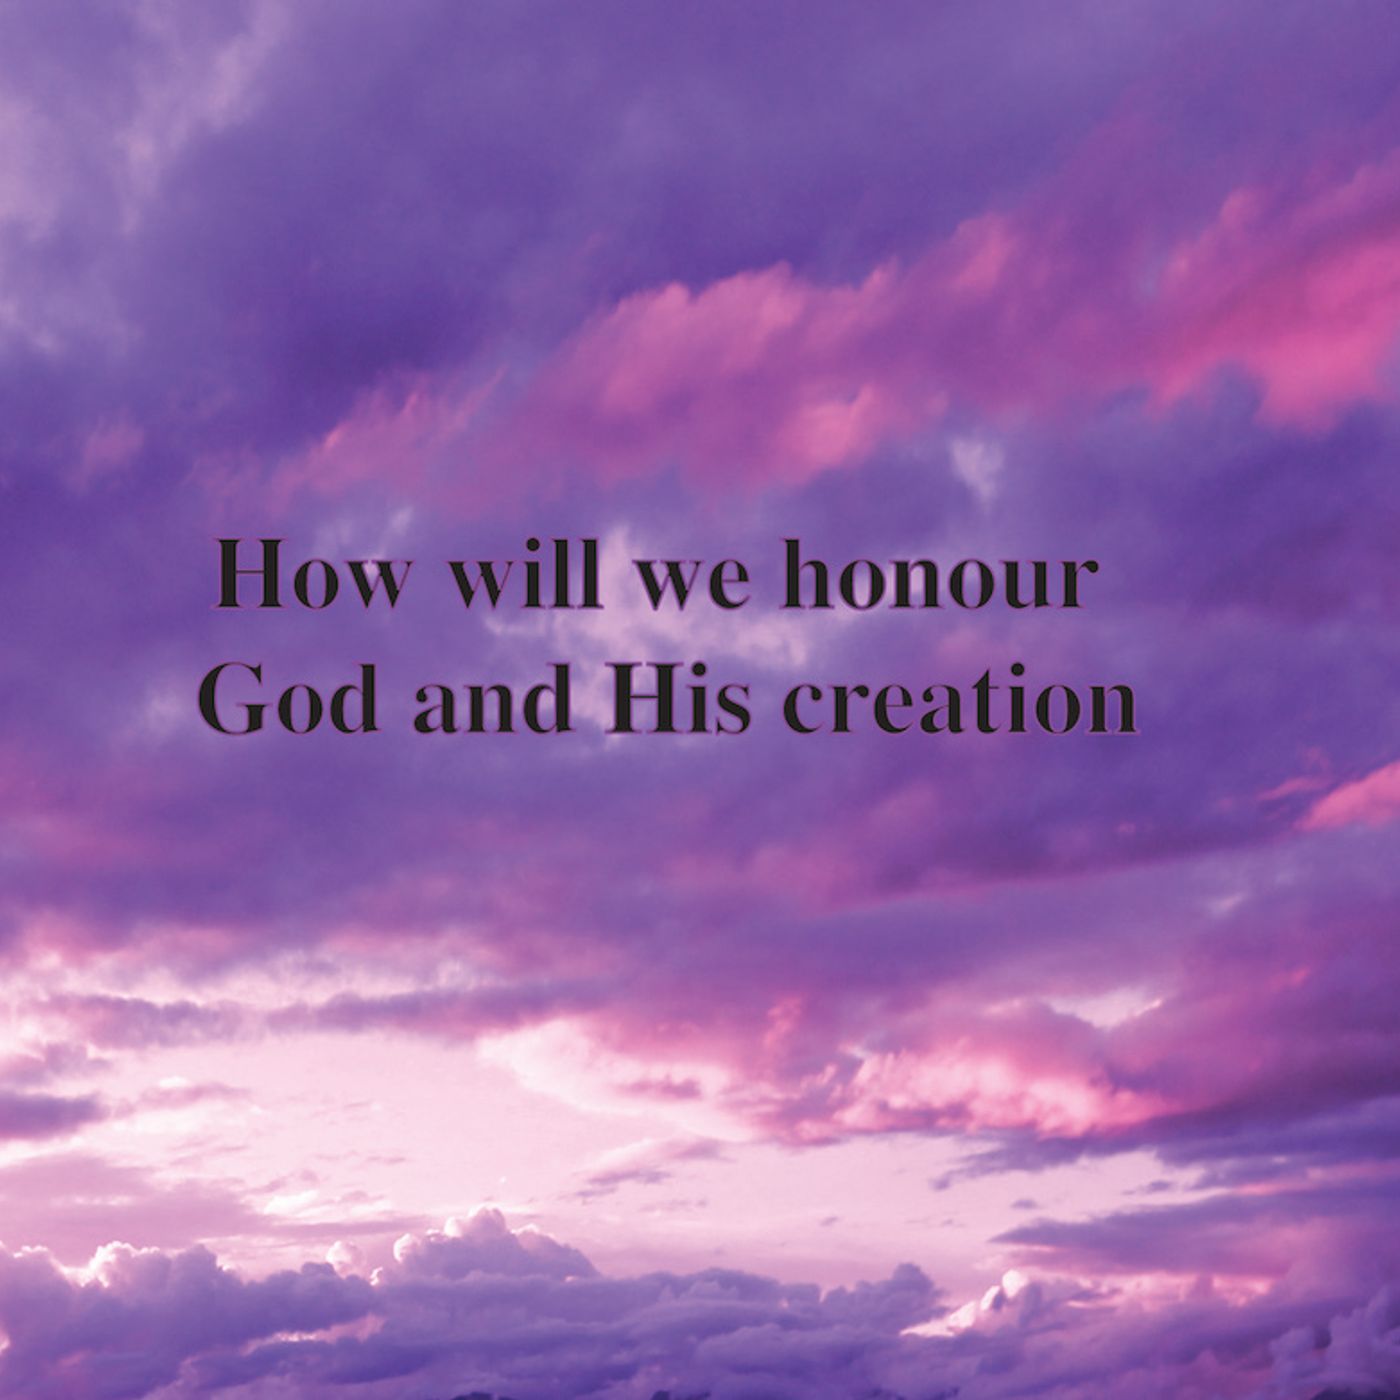 How will we honour God and His creation